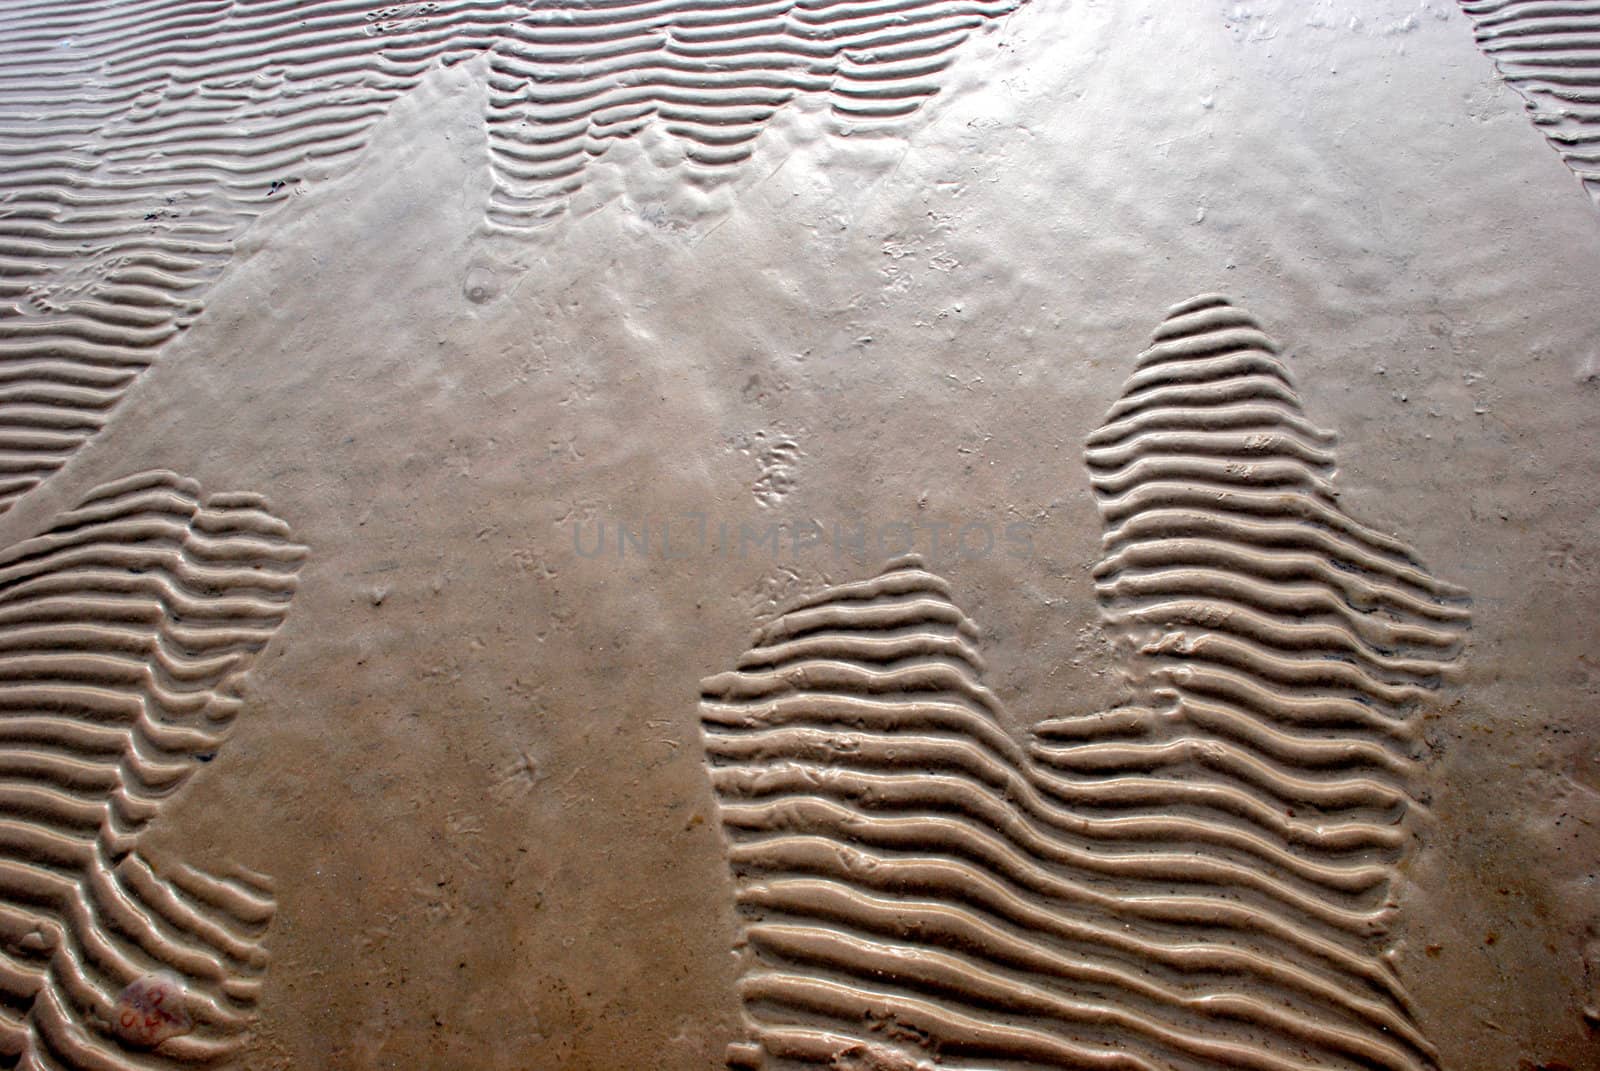 Waves of the sea leave their imprints and on beach sands.